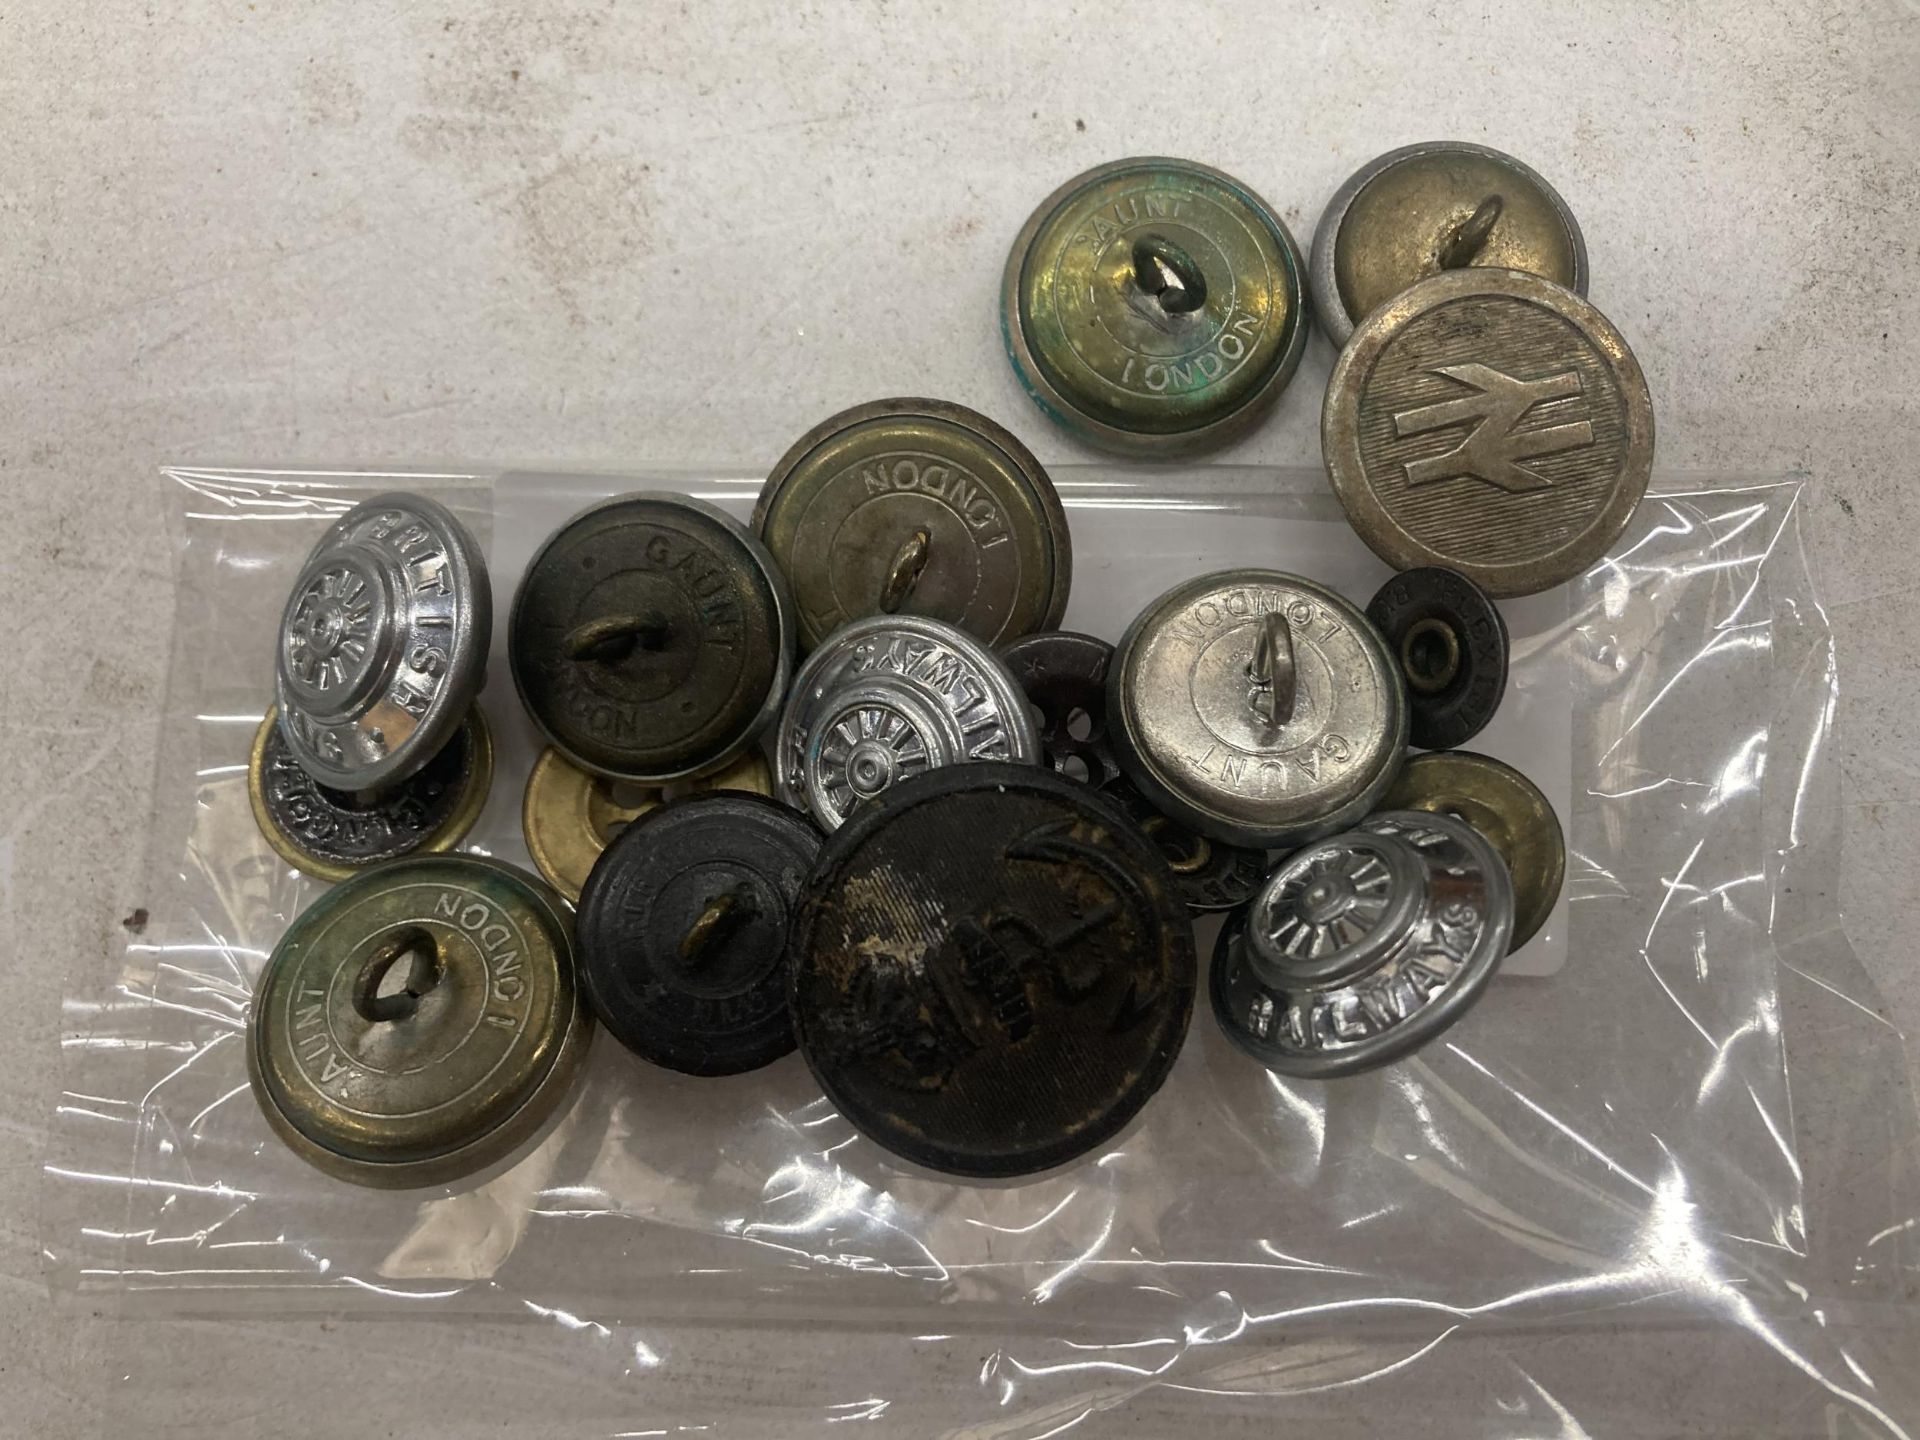 A QUANTITY OF BRITISH RAIL BUTTONS